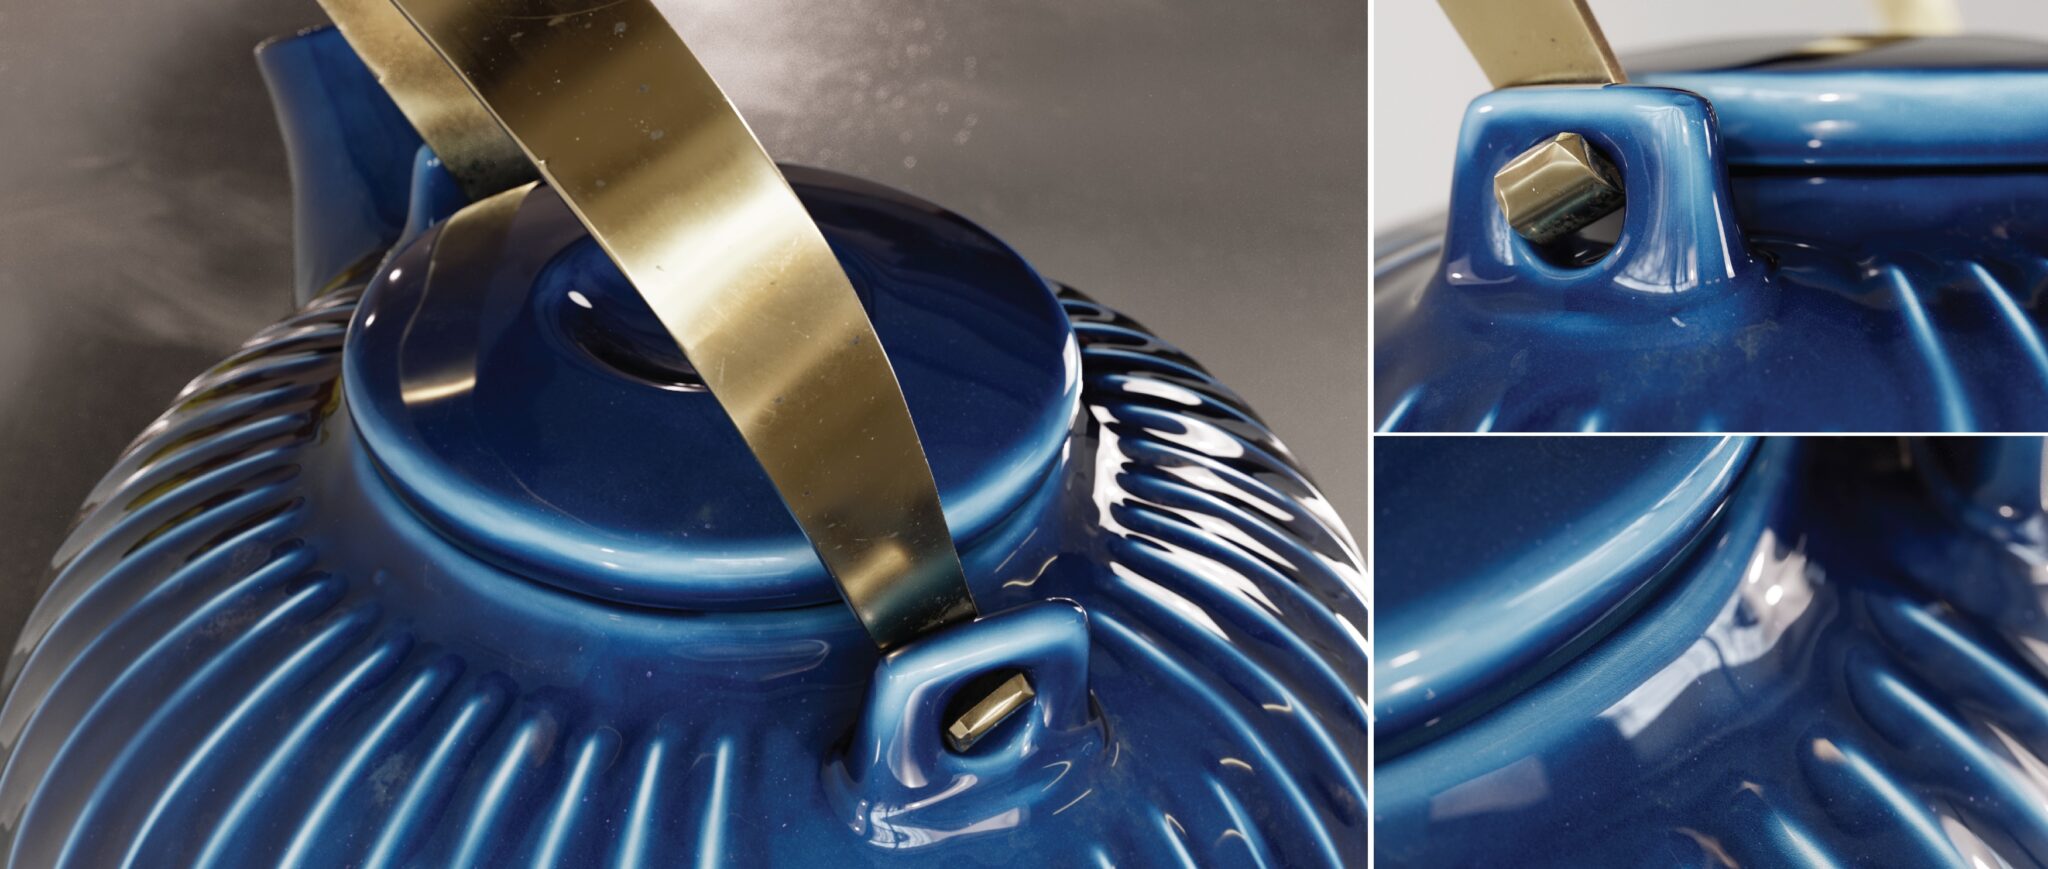 Rendered close-up images of a ceramic blue teapot with gold handle